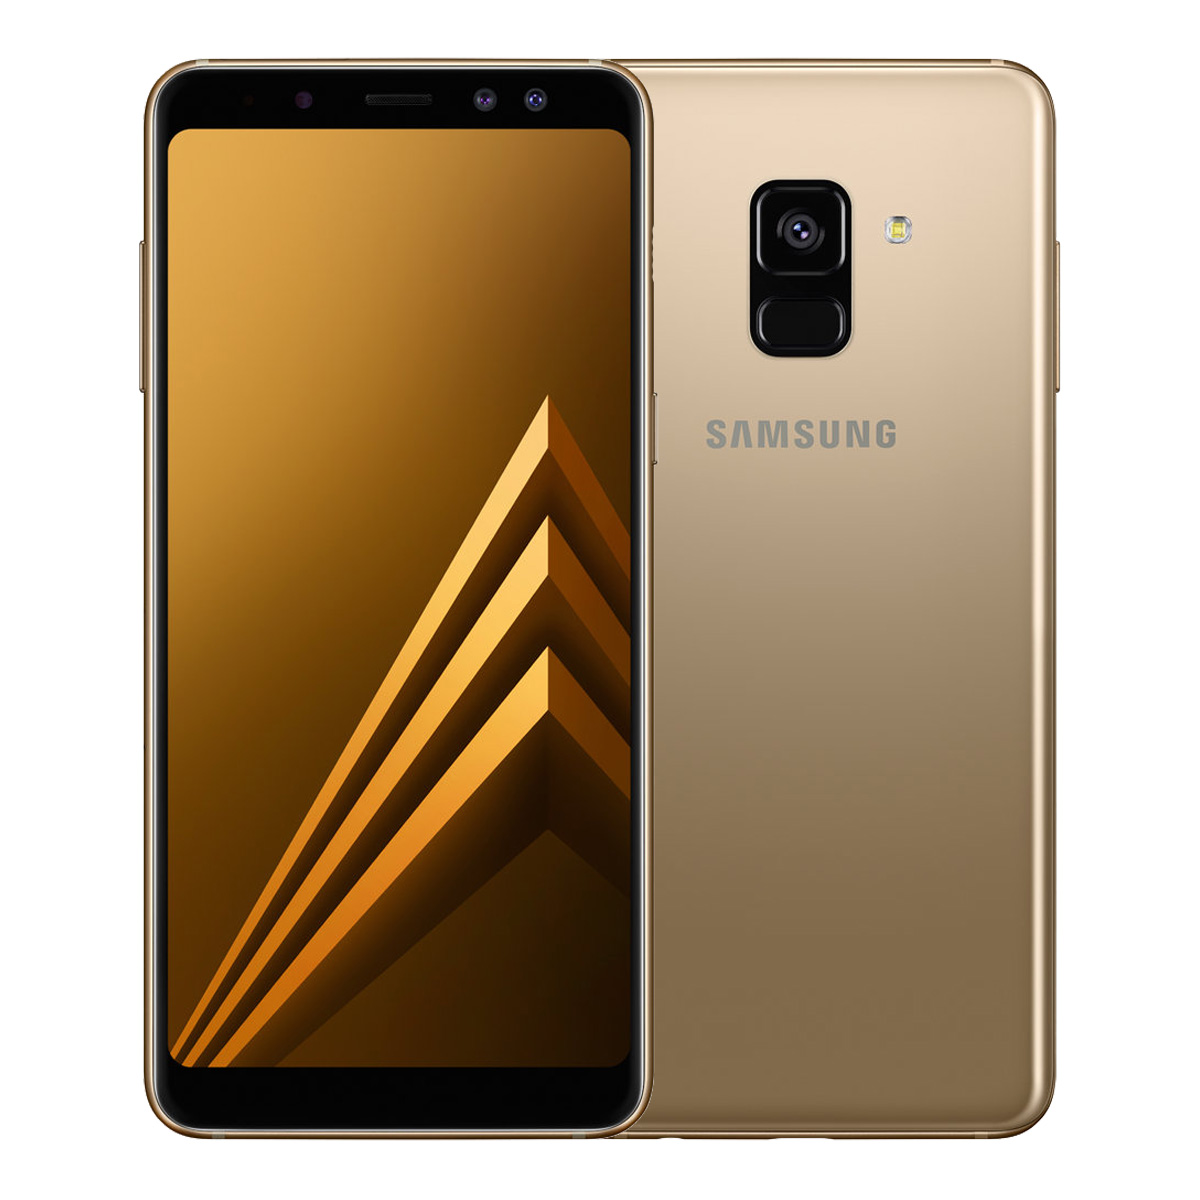 Samsung Galaxy A8 2018 Smart Phone 6 0 quot 4GB 64GB 4G LTE Gold with Free 64GB Memory 